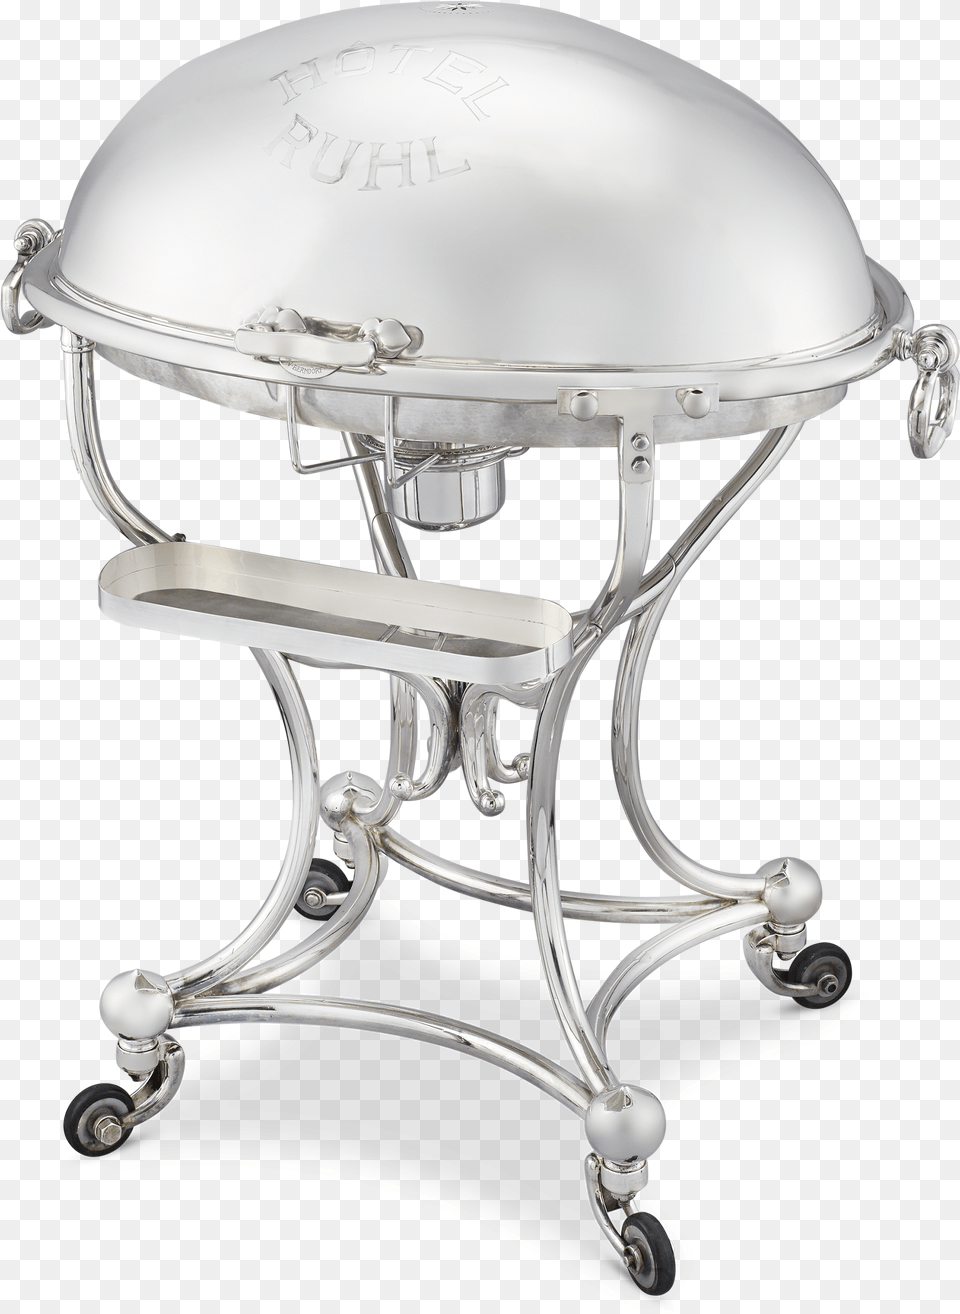 French Silverplate Meat Trolley Outdoor Grill Rack Amp Topper, Helmet, Chandelier, Lamp Free Transparent Png